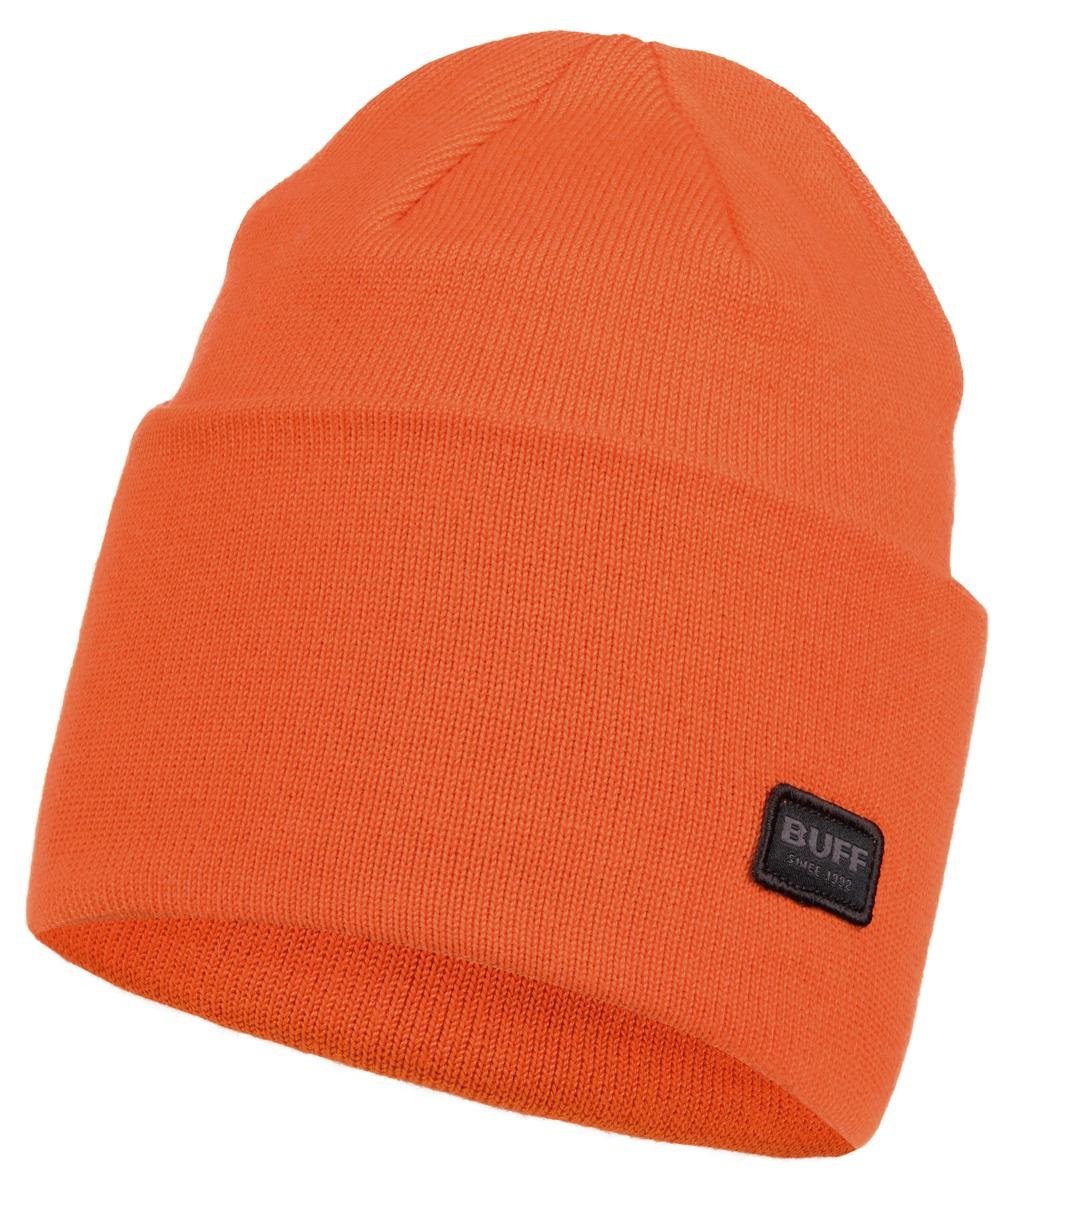 Шапка Buff Knitted Hat Niels Tangerine US:One size, 126457.202.10.00 шапка buff knitted hat niels denim us one size 126457 788 10 00